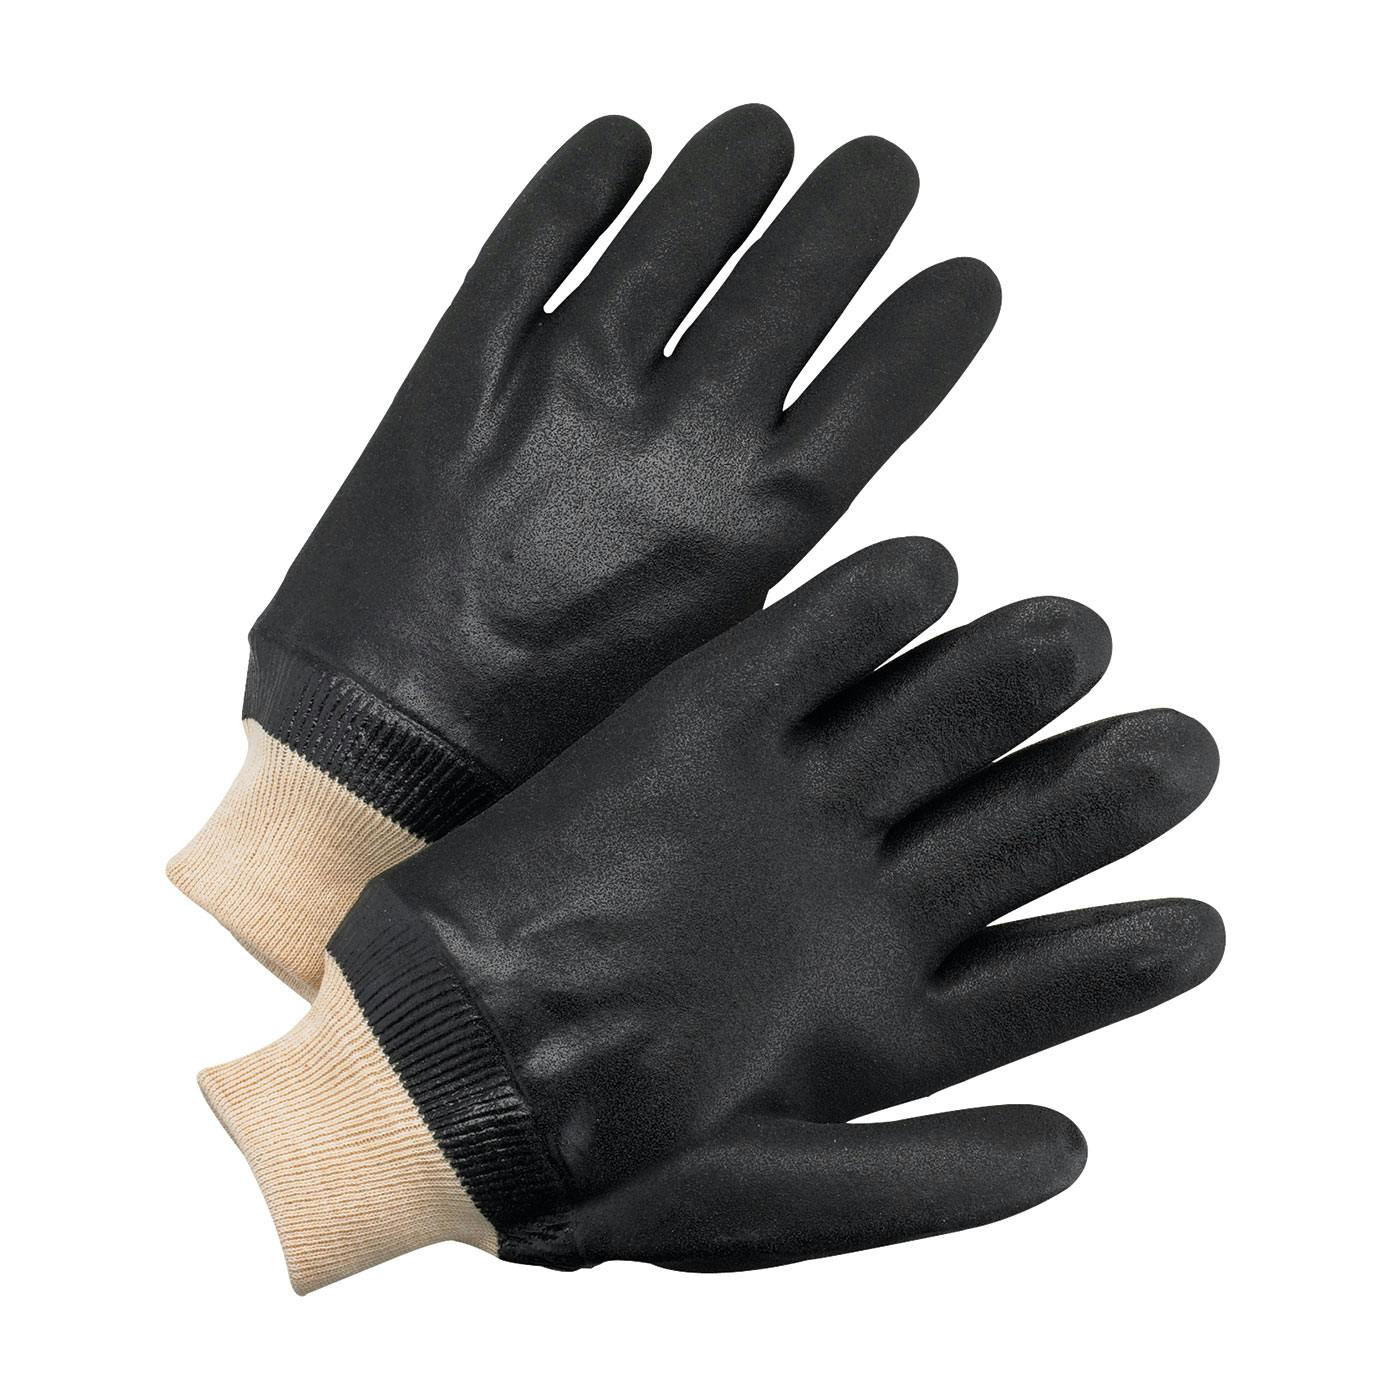 PVC Dipped Glove with Jersey Liner and Rough Sandy Finish - Knit Wrist, Black (J1007RF) - L